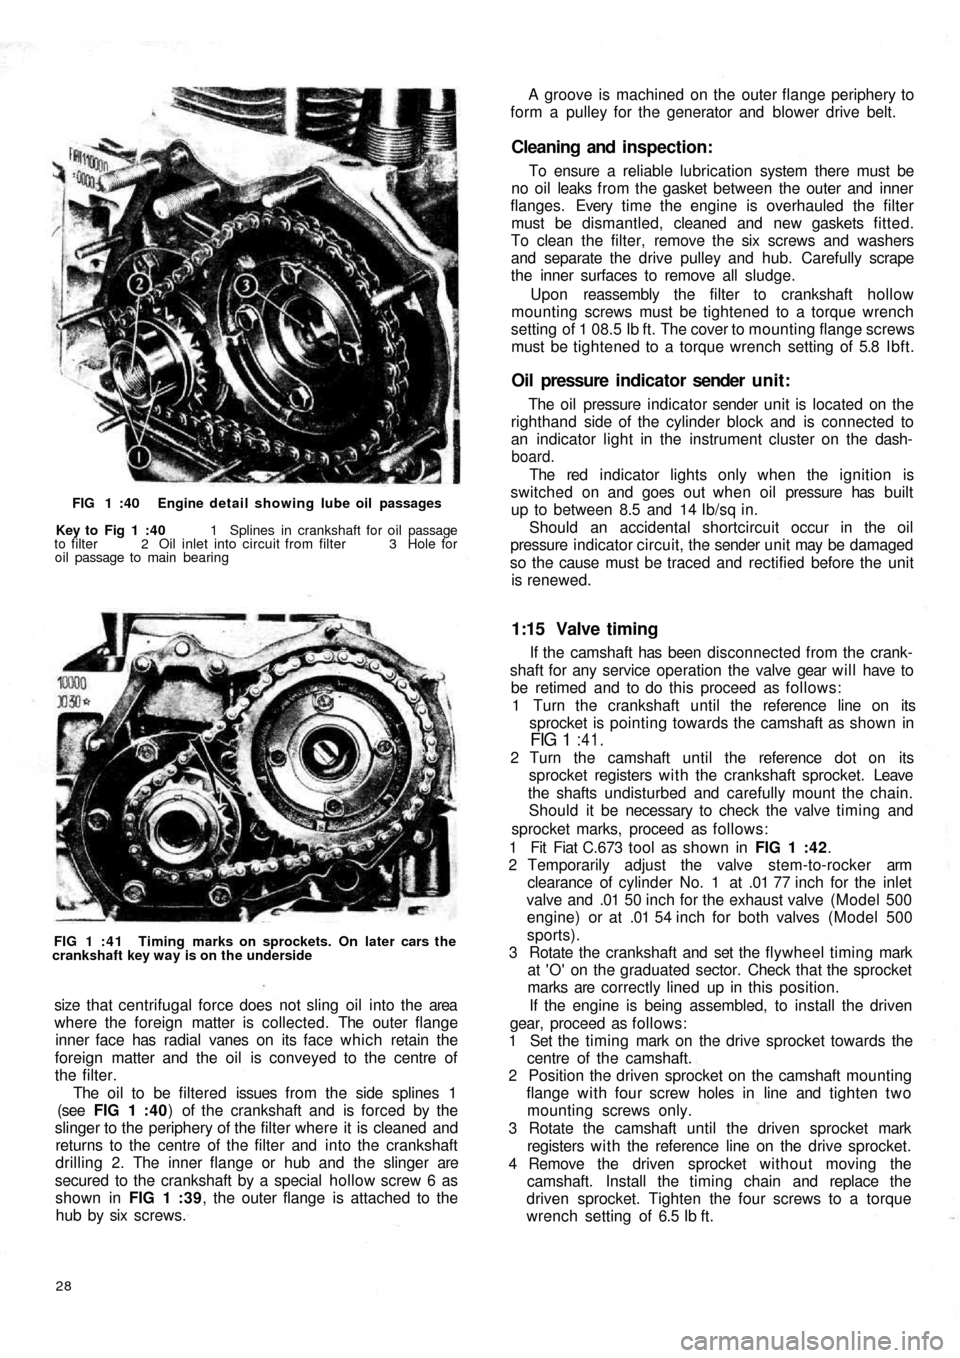 FIAT 500 1969 1.G Owners Manual FIG 1 :40  Engine detail showing lube oil passages
Key to Fig 1 :40  1  Splines in crankshaft for oil passage
to filter  2  Oil inlet into circuit from filter 3 Hole for
oil passage to main bearing
FI